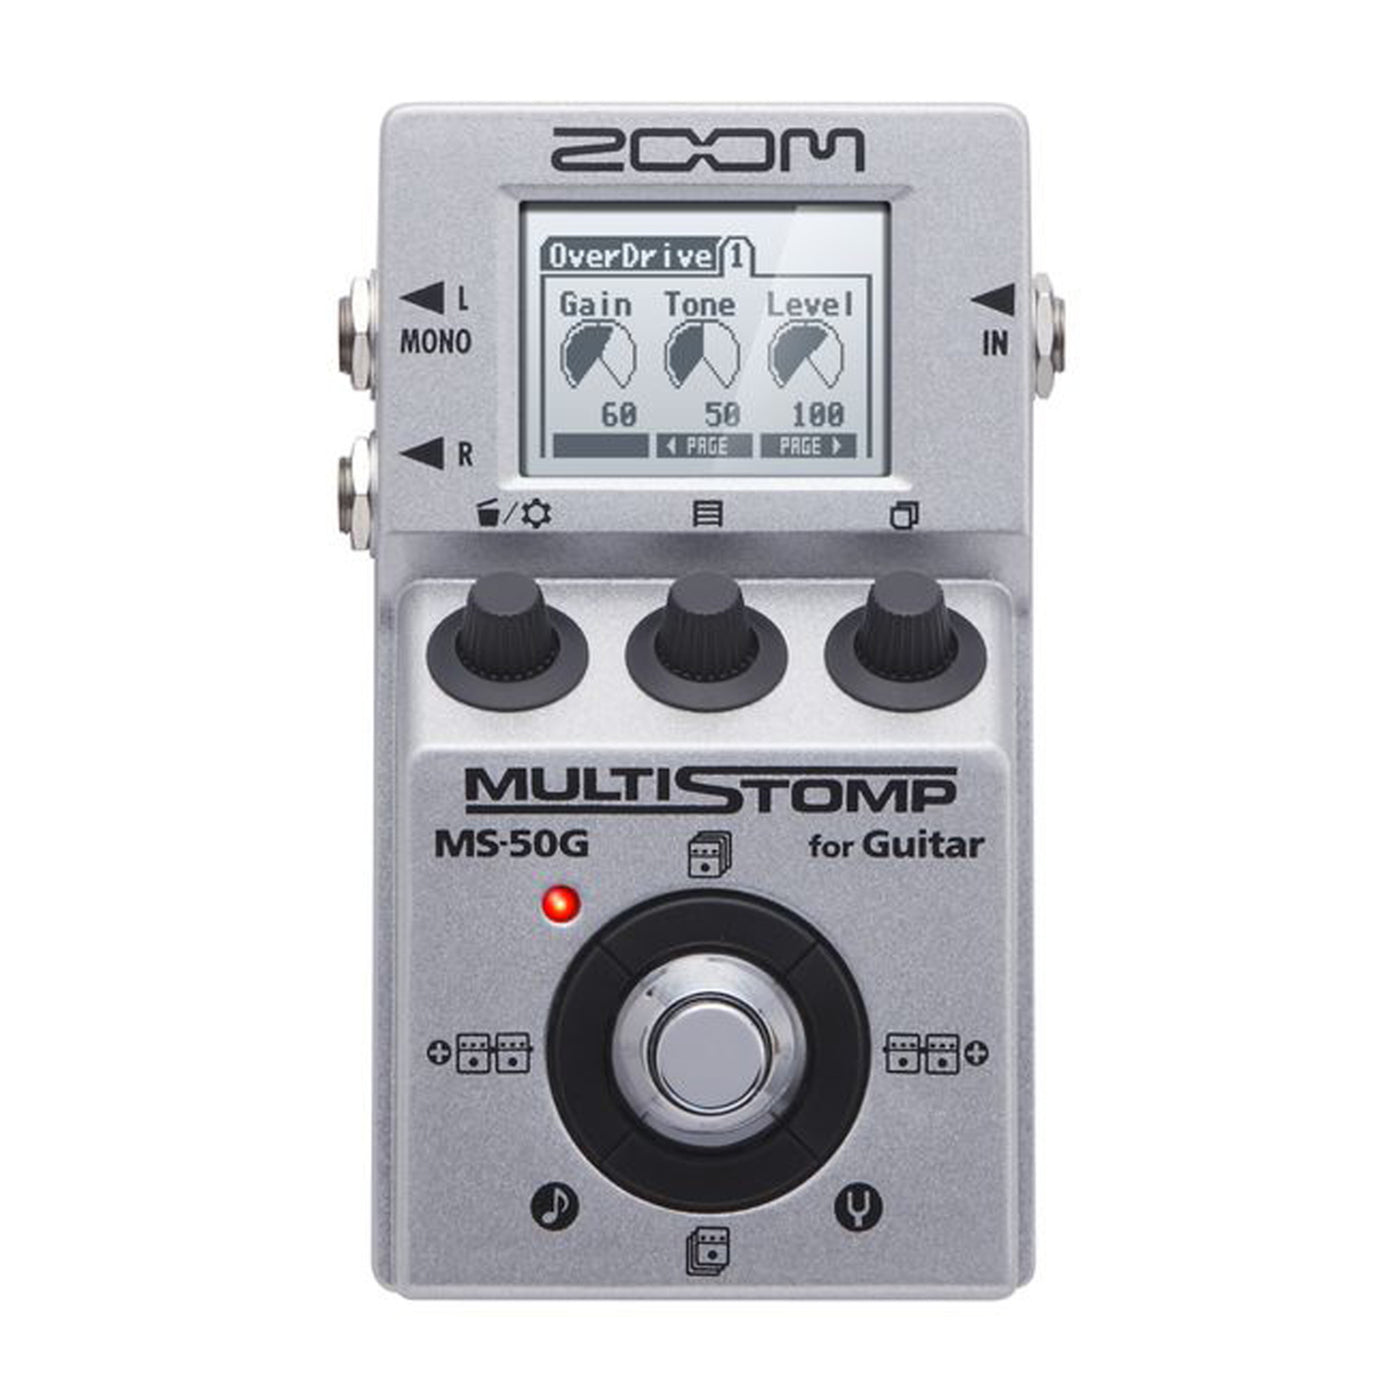 Zoom MS-50G Multistomp Guitar Pedal